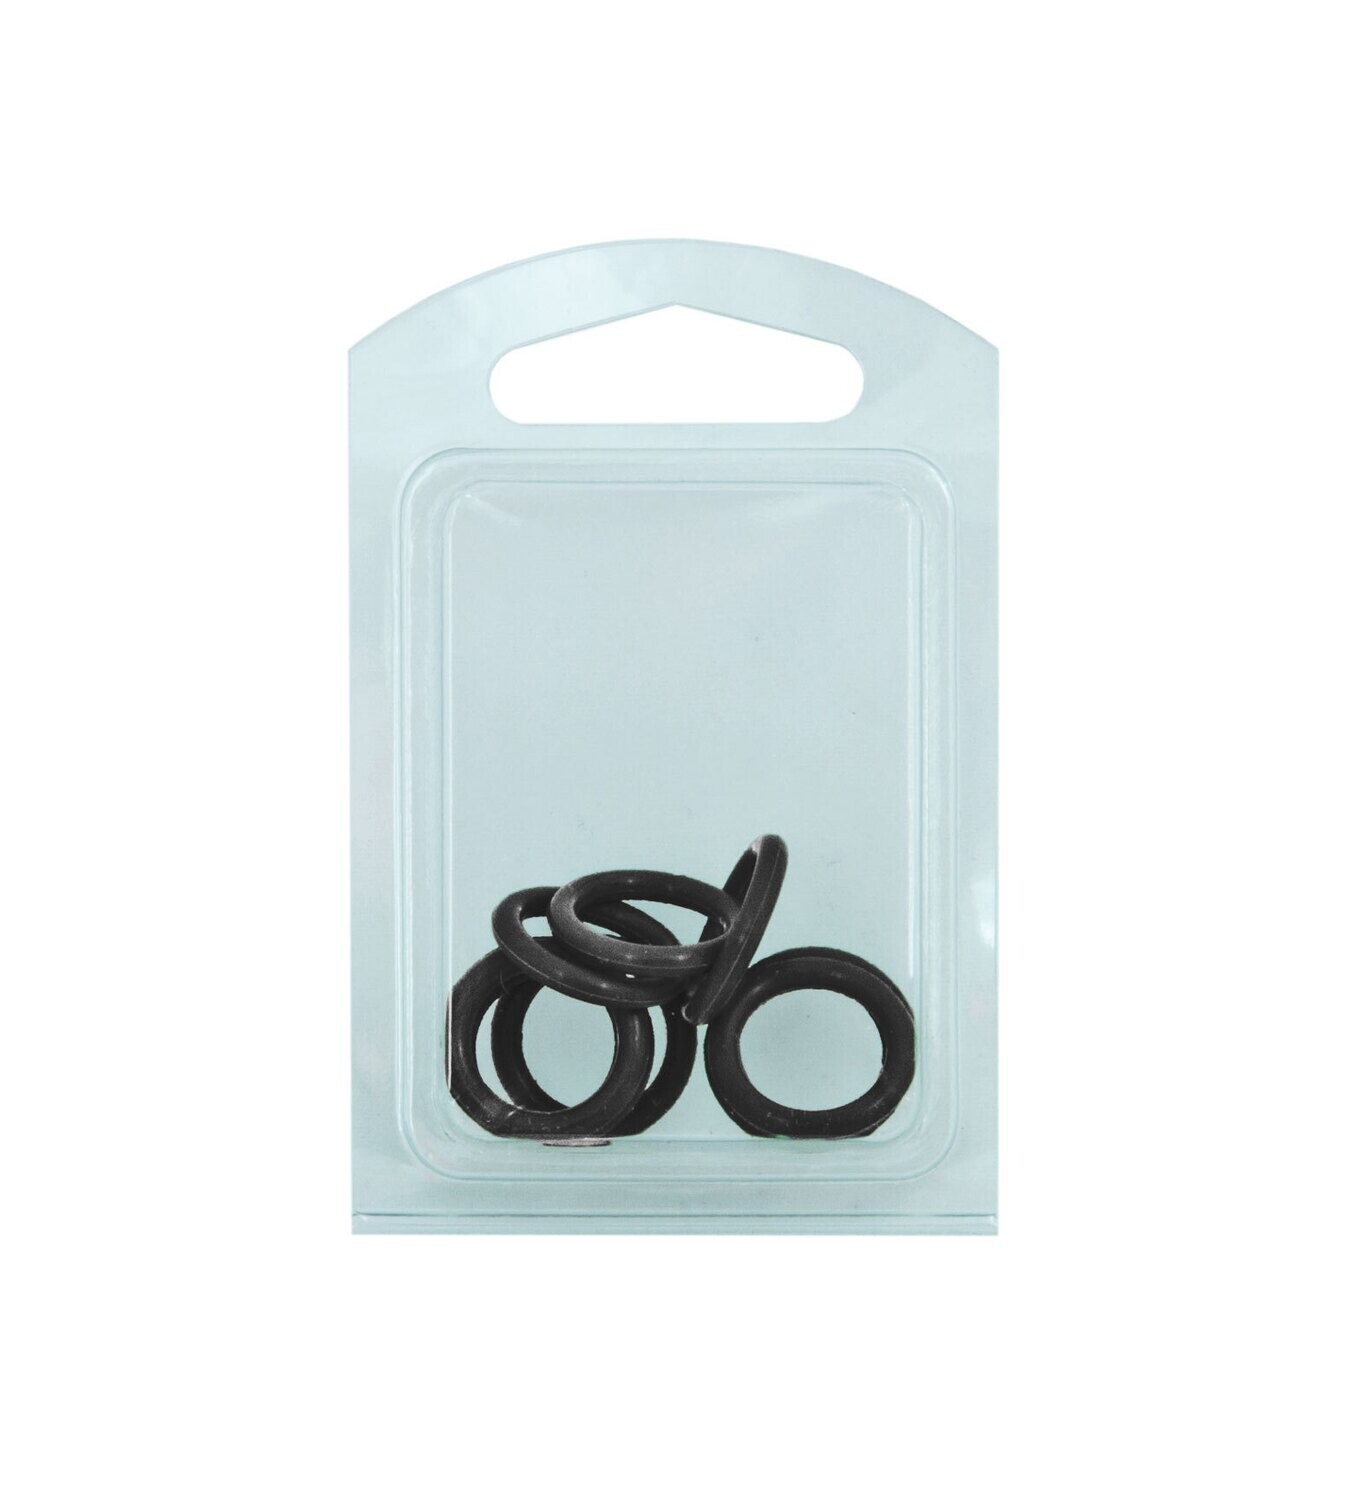 O-rings for DIN connection 10 pcs